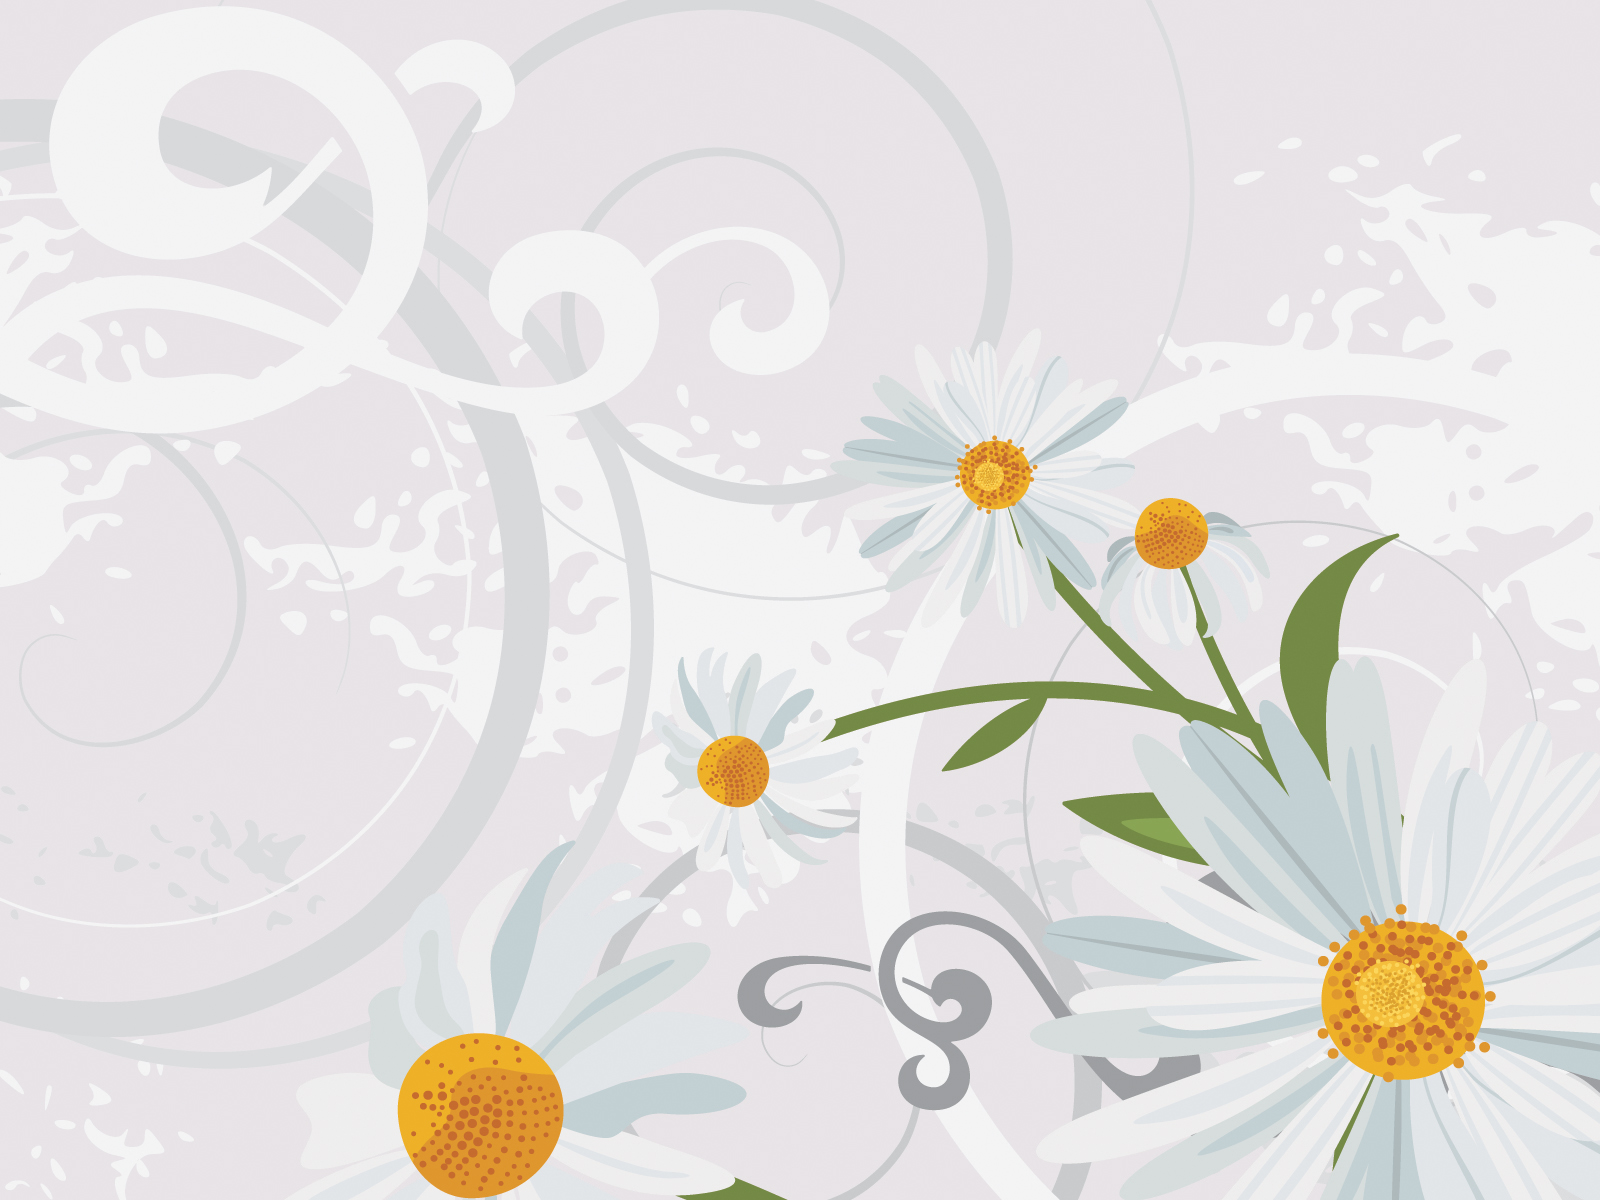 Abstract Flowers Powerpoint Templates - Abstract, Orange, Silver, White,  Yellow - Free PPT Backgrounds and Templates